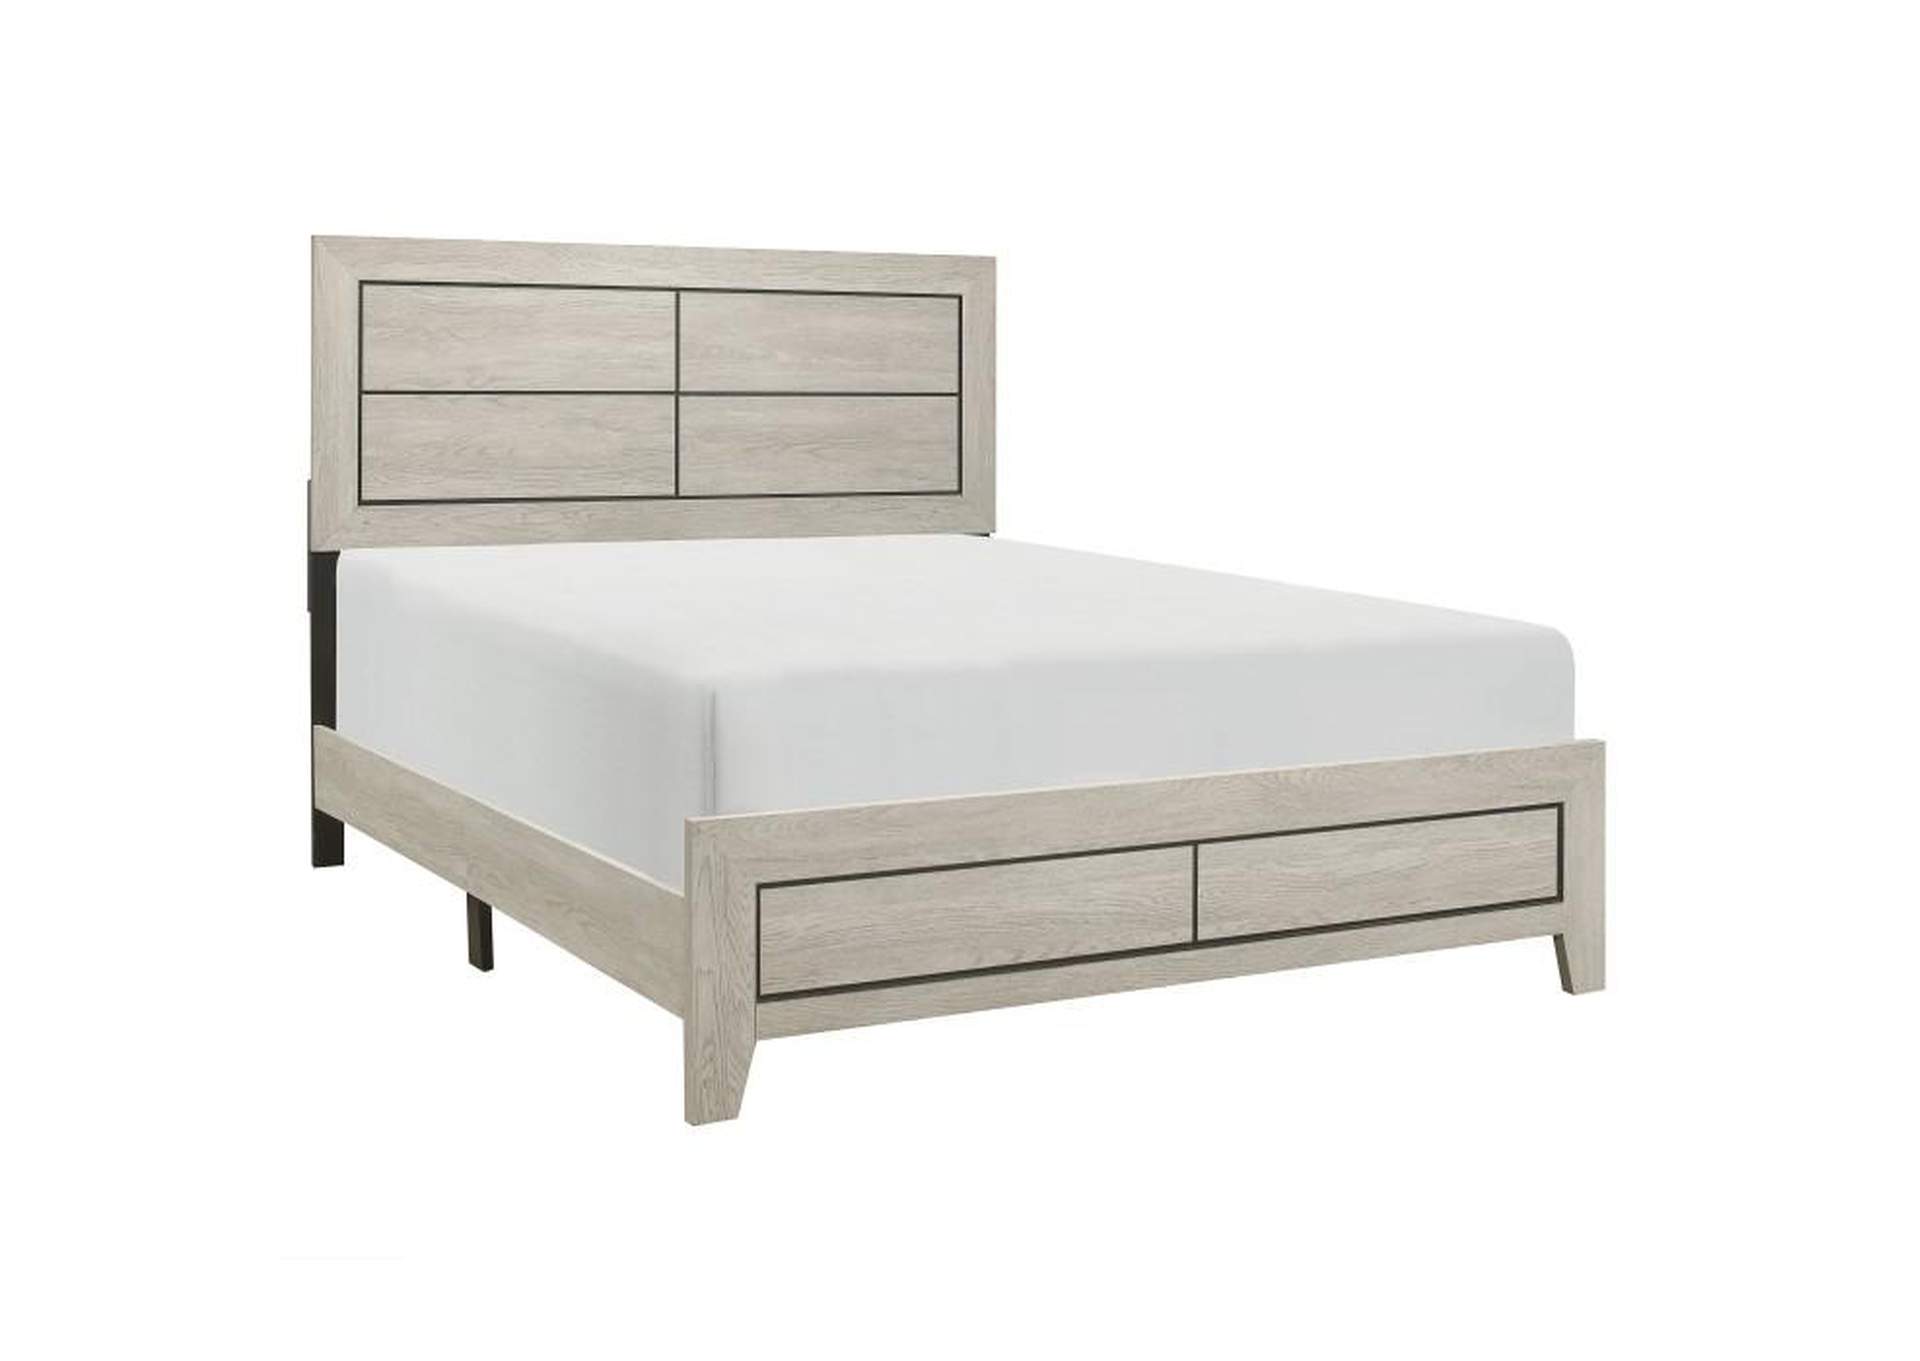 Quinby Queen Bed,Homelegance